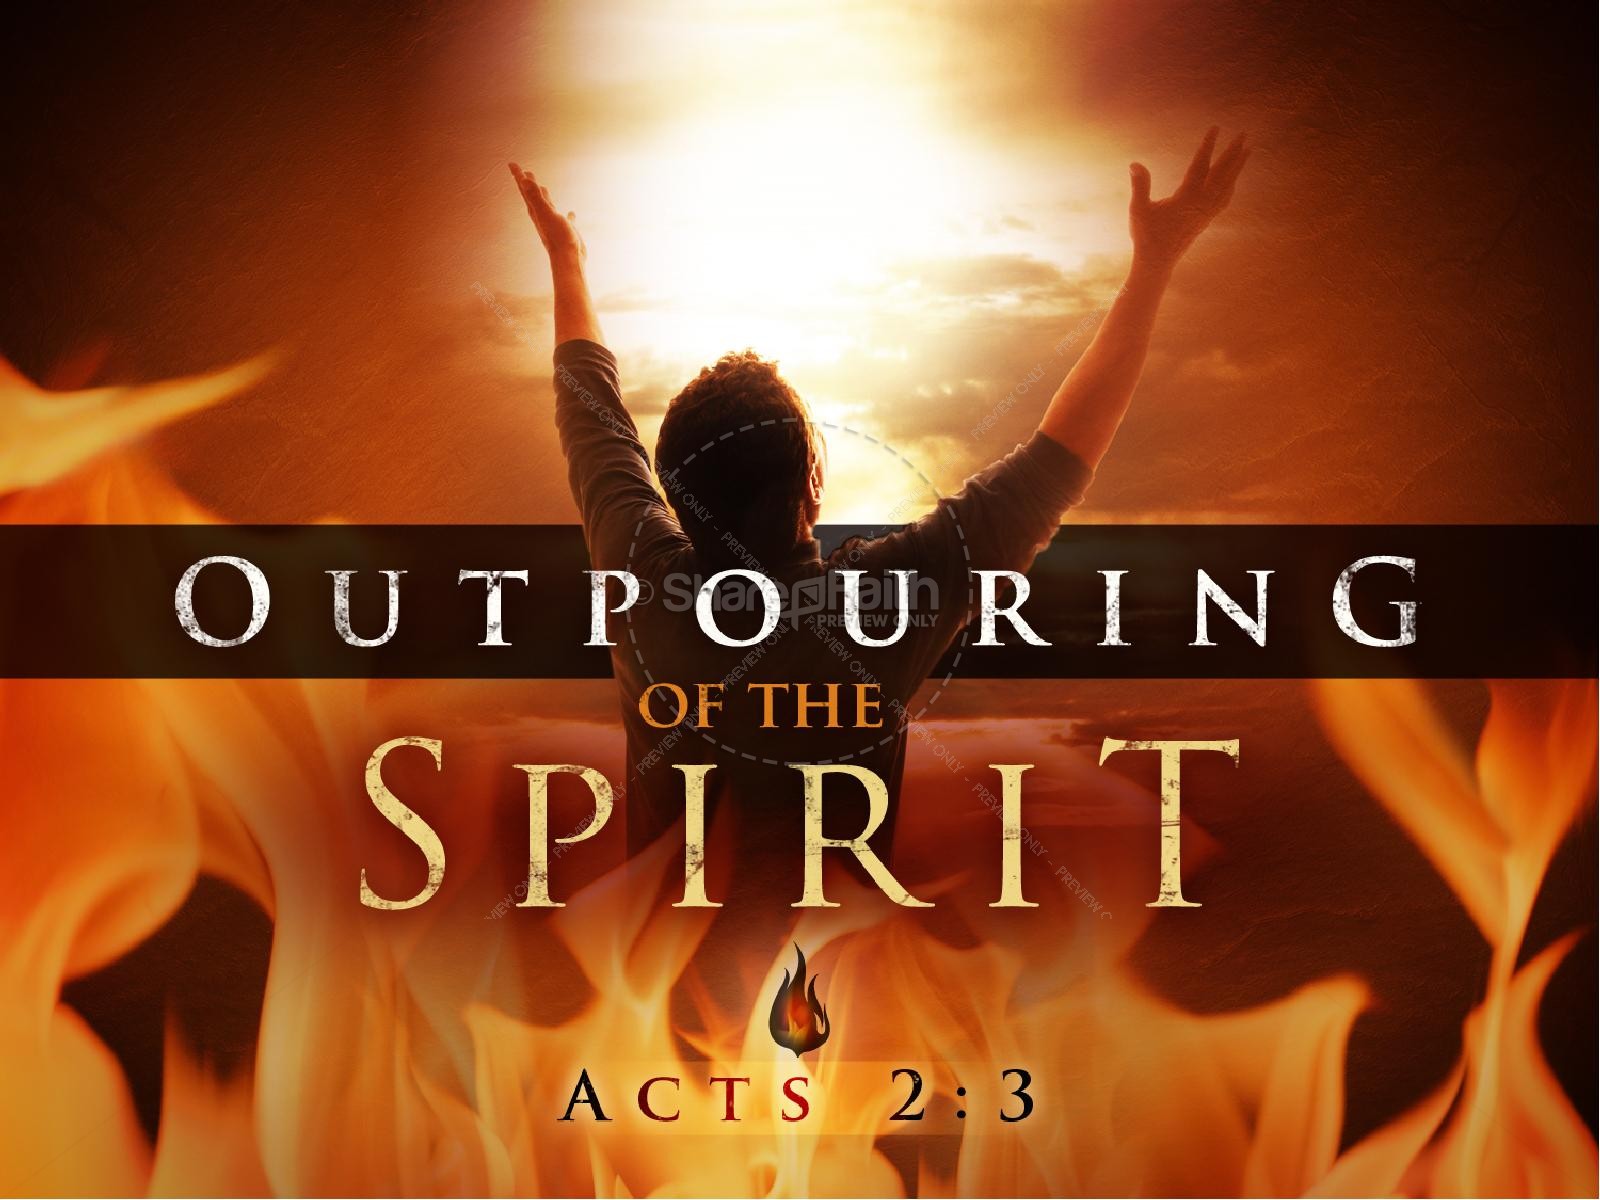 Outpouring of the Spirit Pentecost PowerPoint Template Thumbnail 1